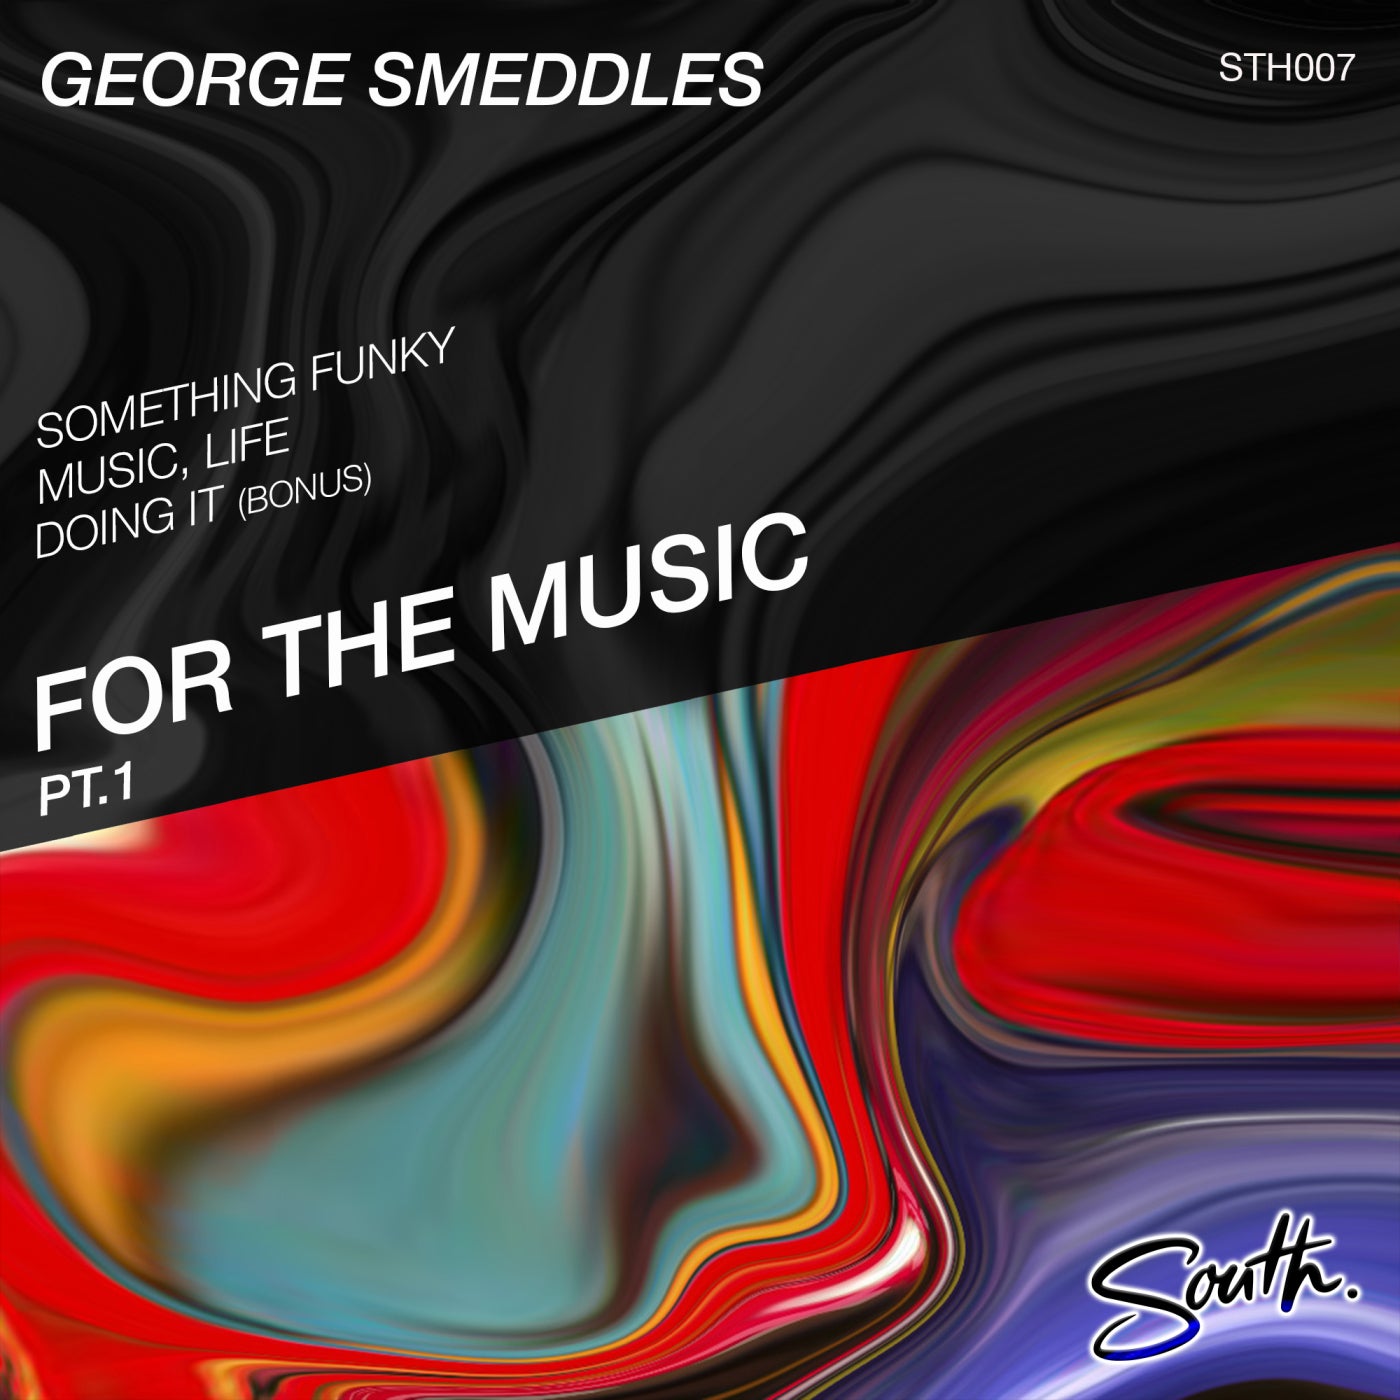 image cover: George Smeddles - For The Music, Pt. 1 on South